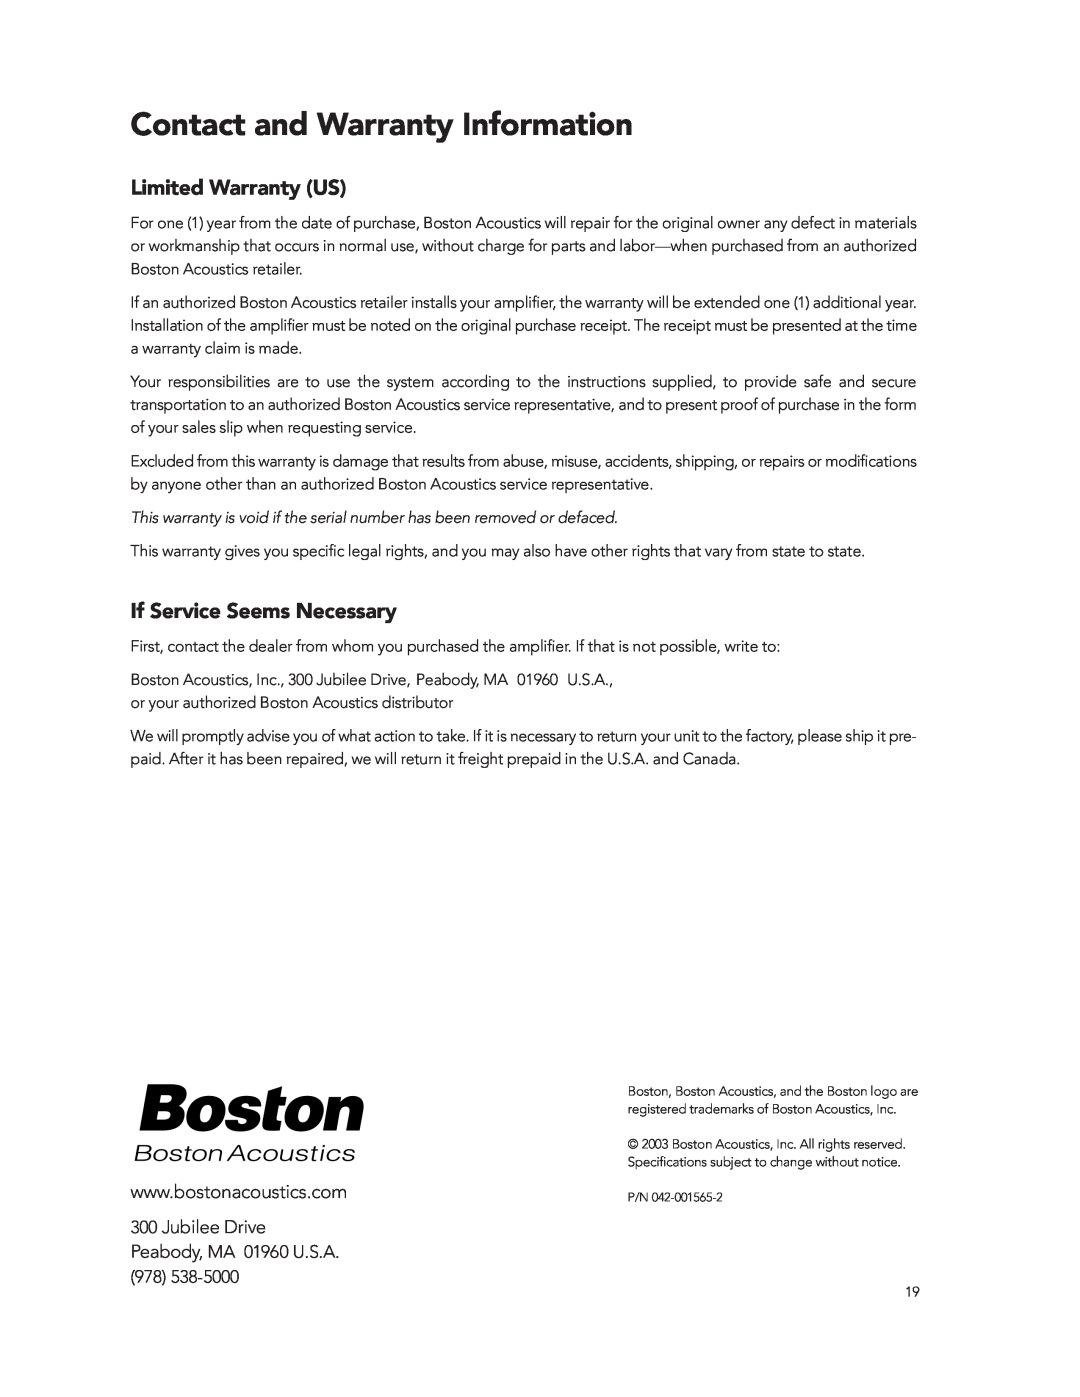 Boston Acoustics GT-20 GT-222 manual Contact and Warranty Information, Limited Warranty US, If Service Seems Necessary 